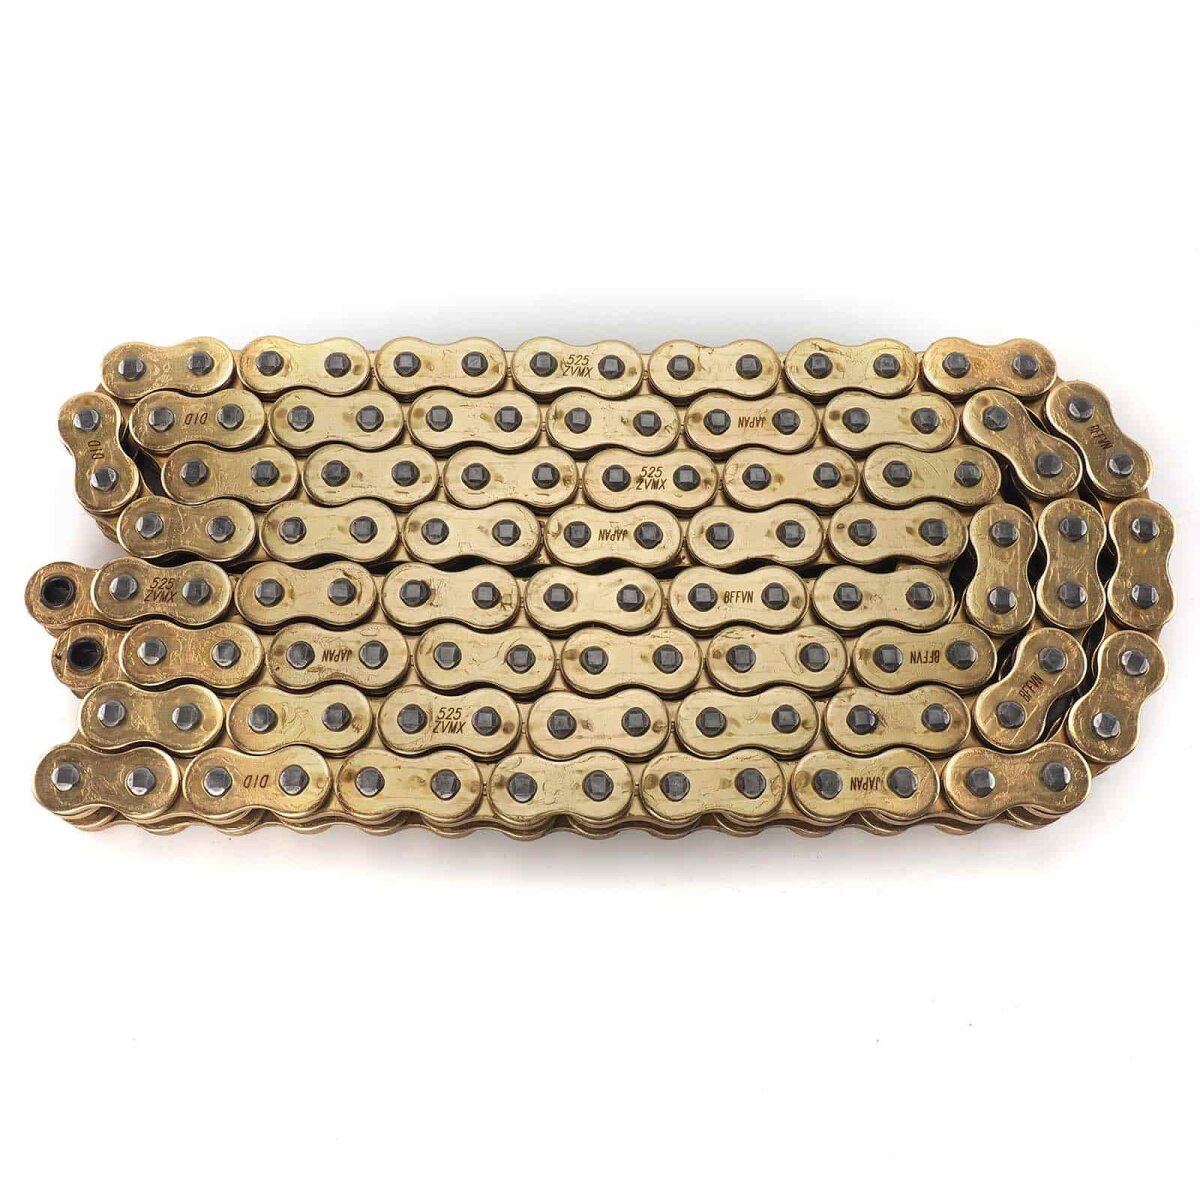 D.I.D X-ring chain G&G 525ZVMX2/118 with rivet lock, 133,90 € for KTM  Adventure 990 LC8 2006-2007